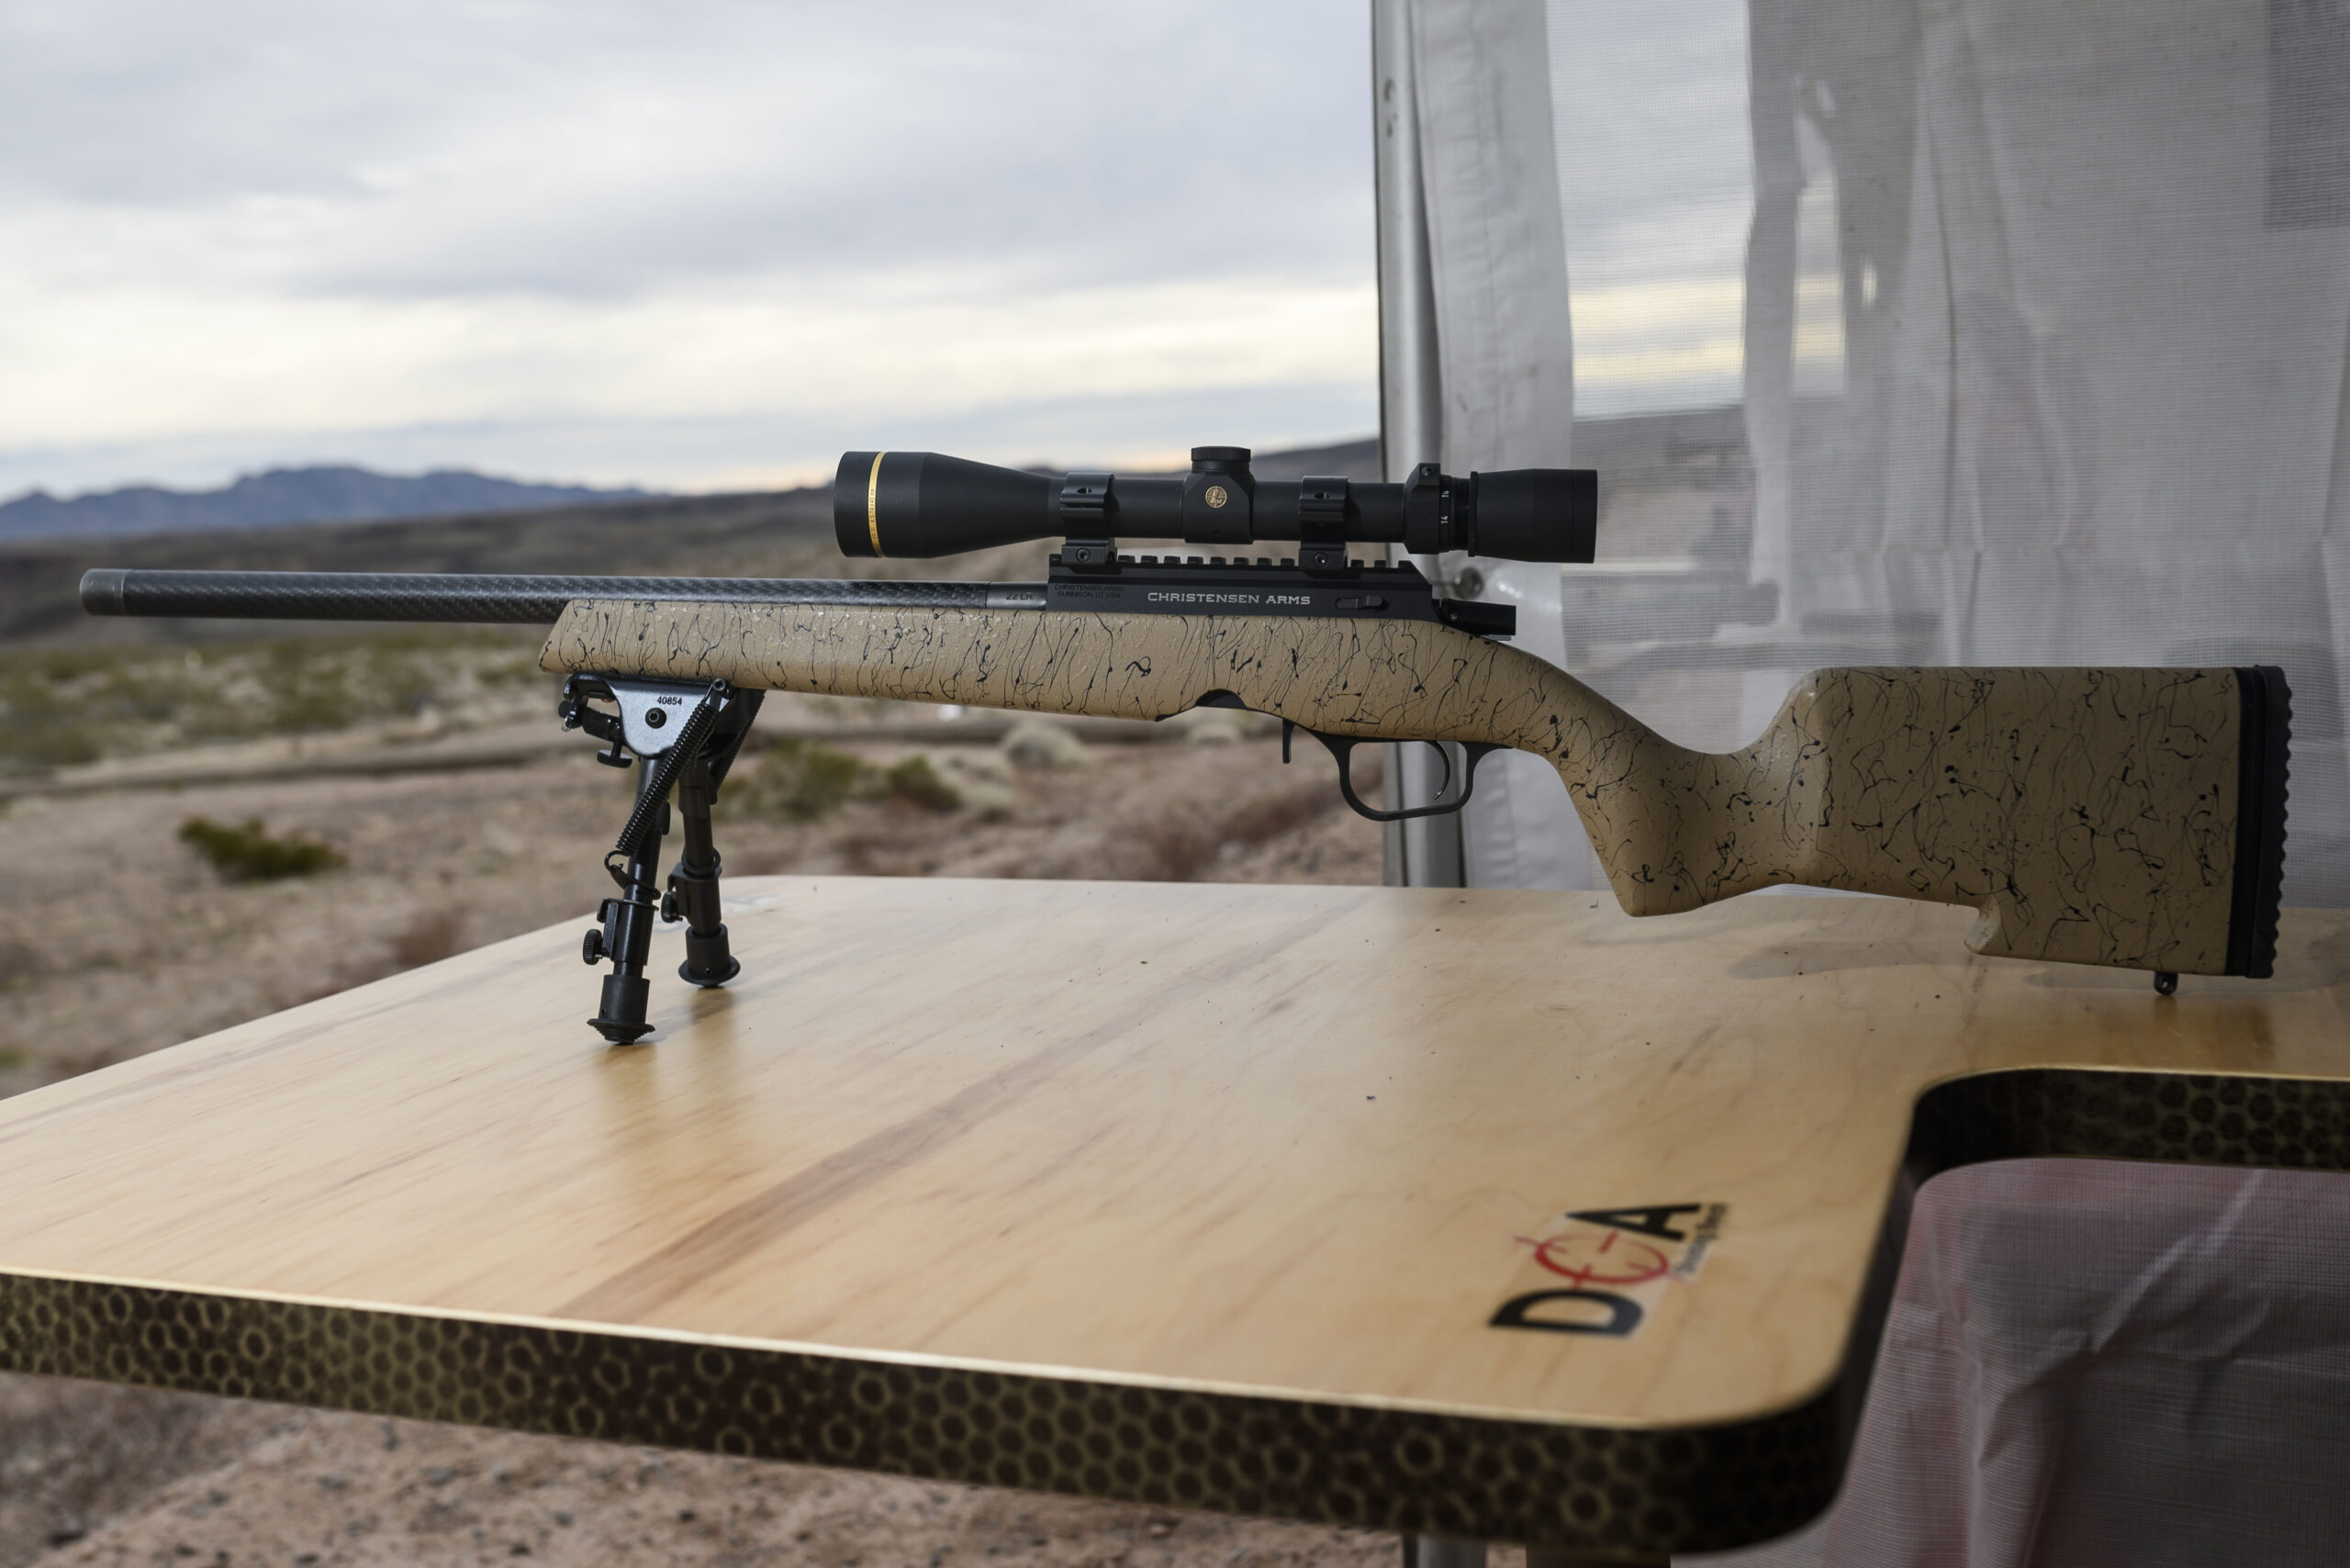 A tan Christensen Arms rimfire rifle with a scope sitting on a DOA shooting bench